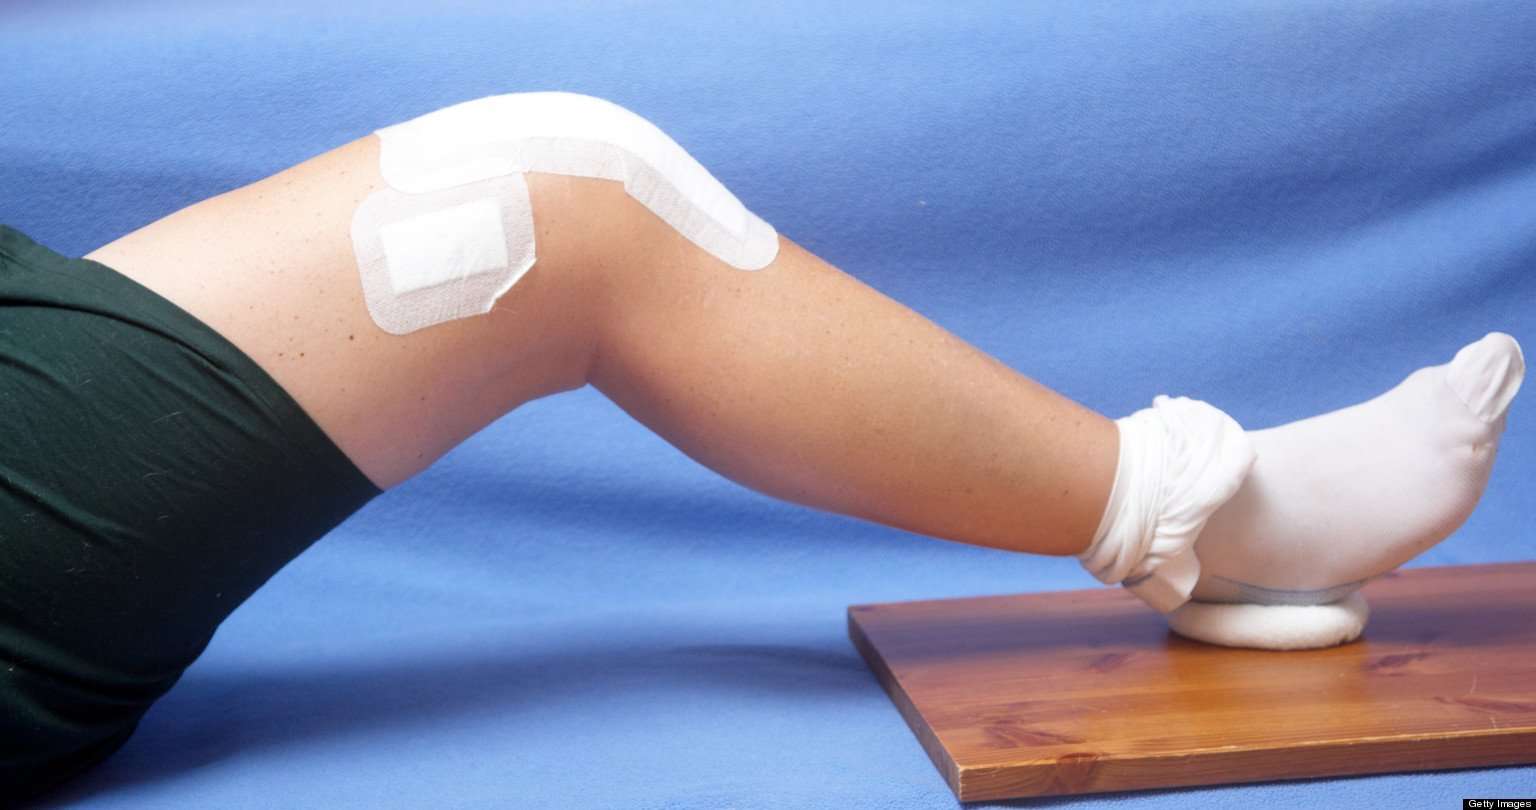 Knee Replacement Recovery: Get Ready for the 3